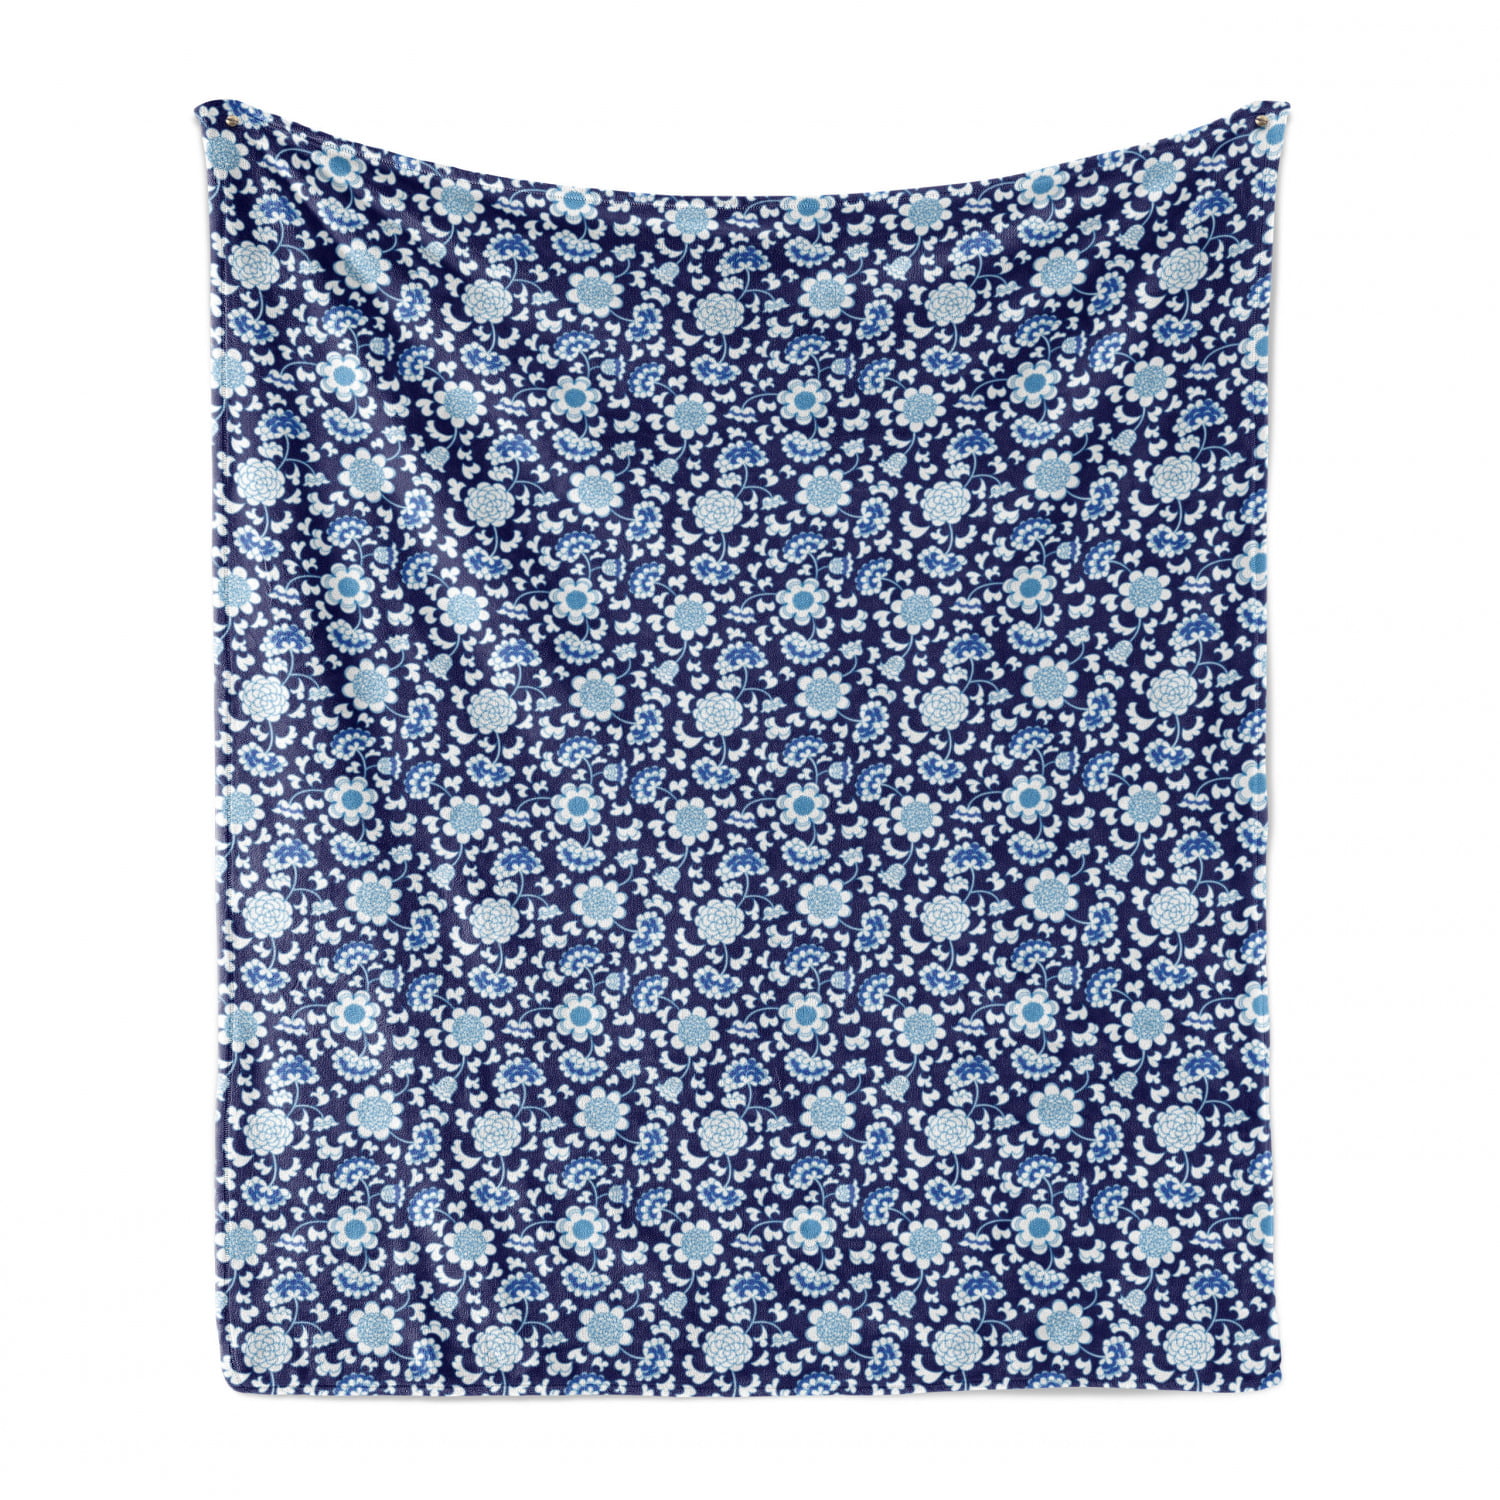 Ambesonne Oriental Soft Flannel Fleece Throw Blanket Traditional Floral Motifs Nostalgic Cozy Plush for Indoor and Outdoor Use 60 x 80 Sky Blue White